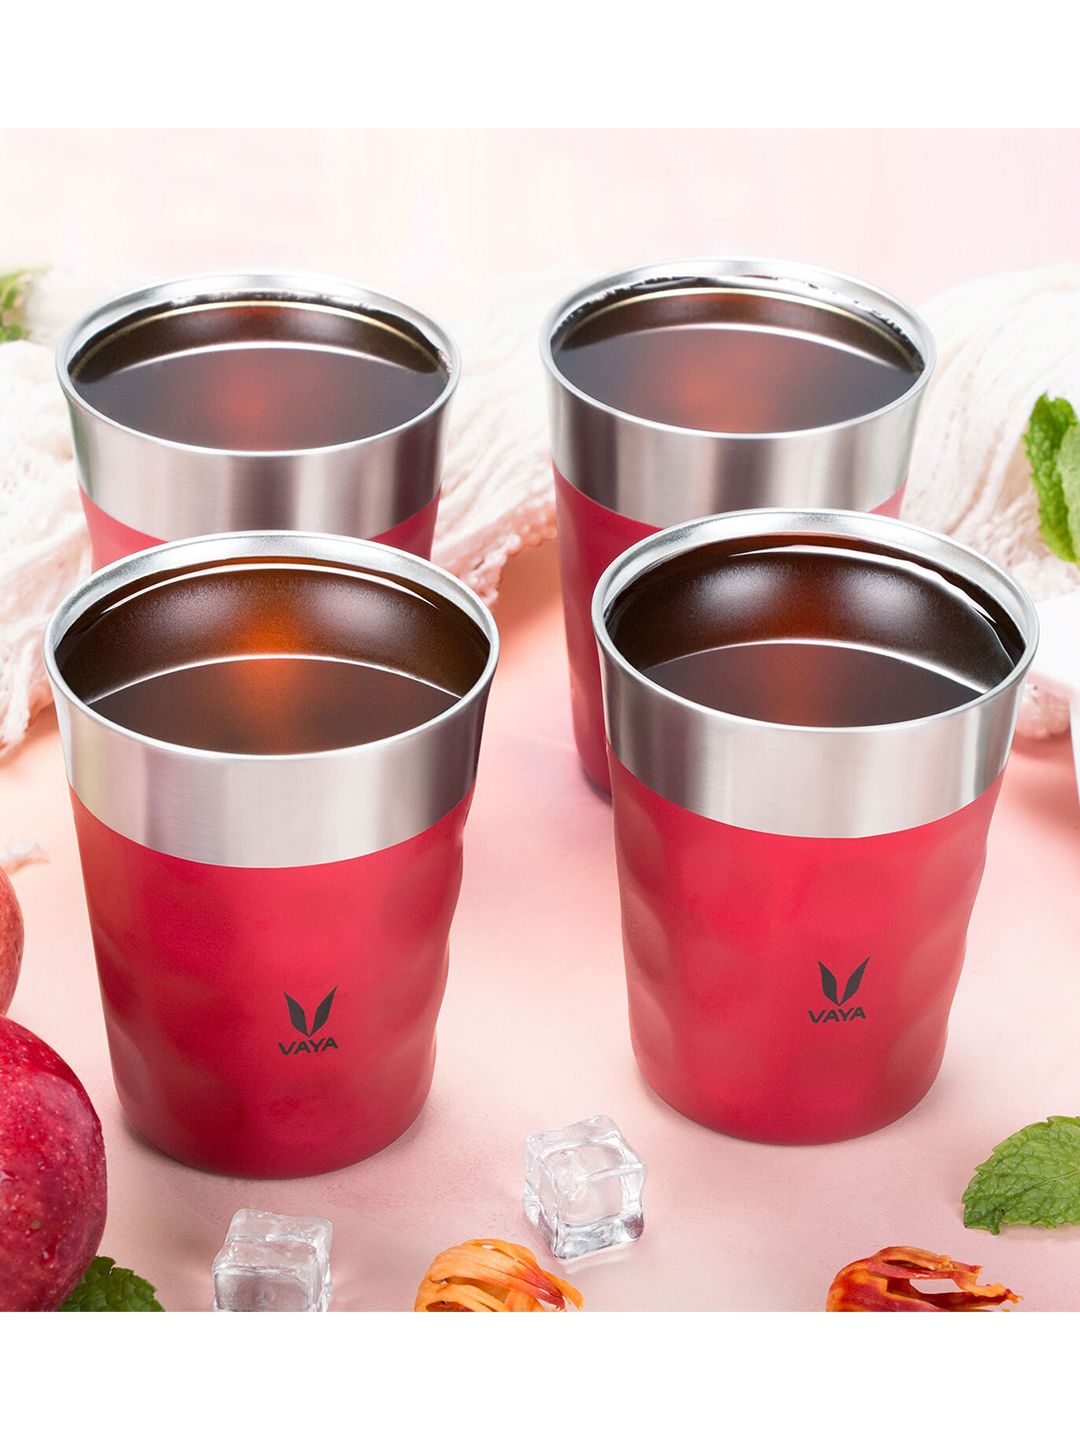 Vaya Red & Silver-Toned Solid Stainless Steel Matte Kulladhs Set of Cups and Mugs Price in India